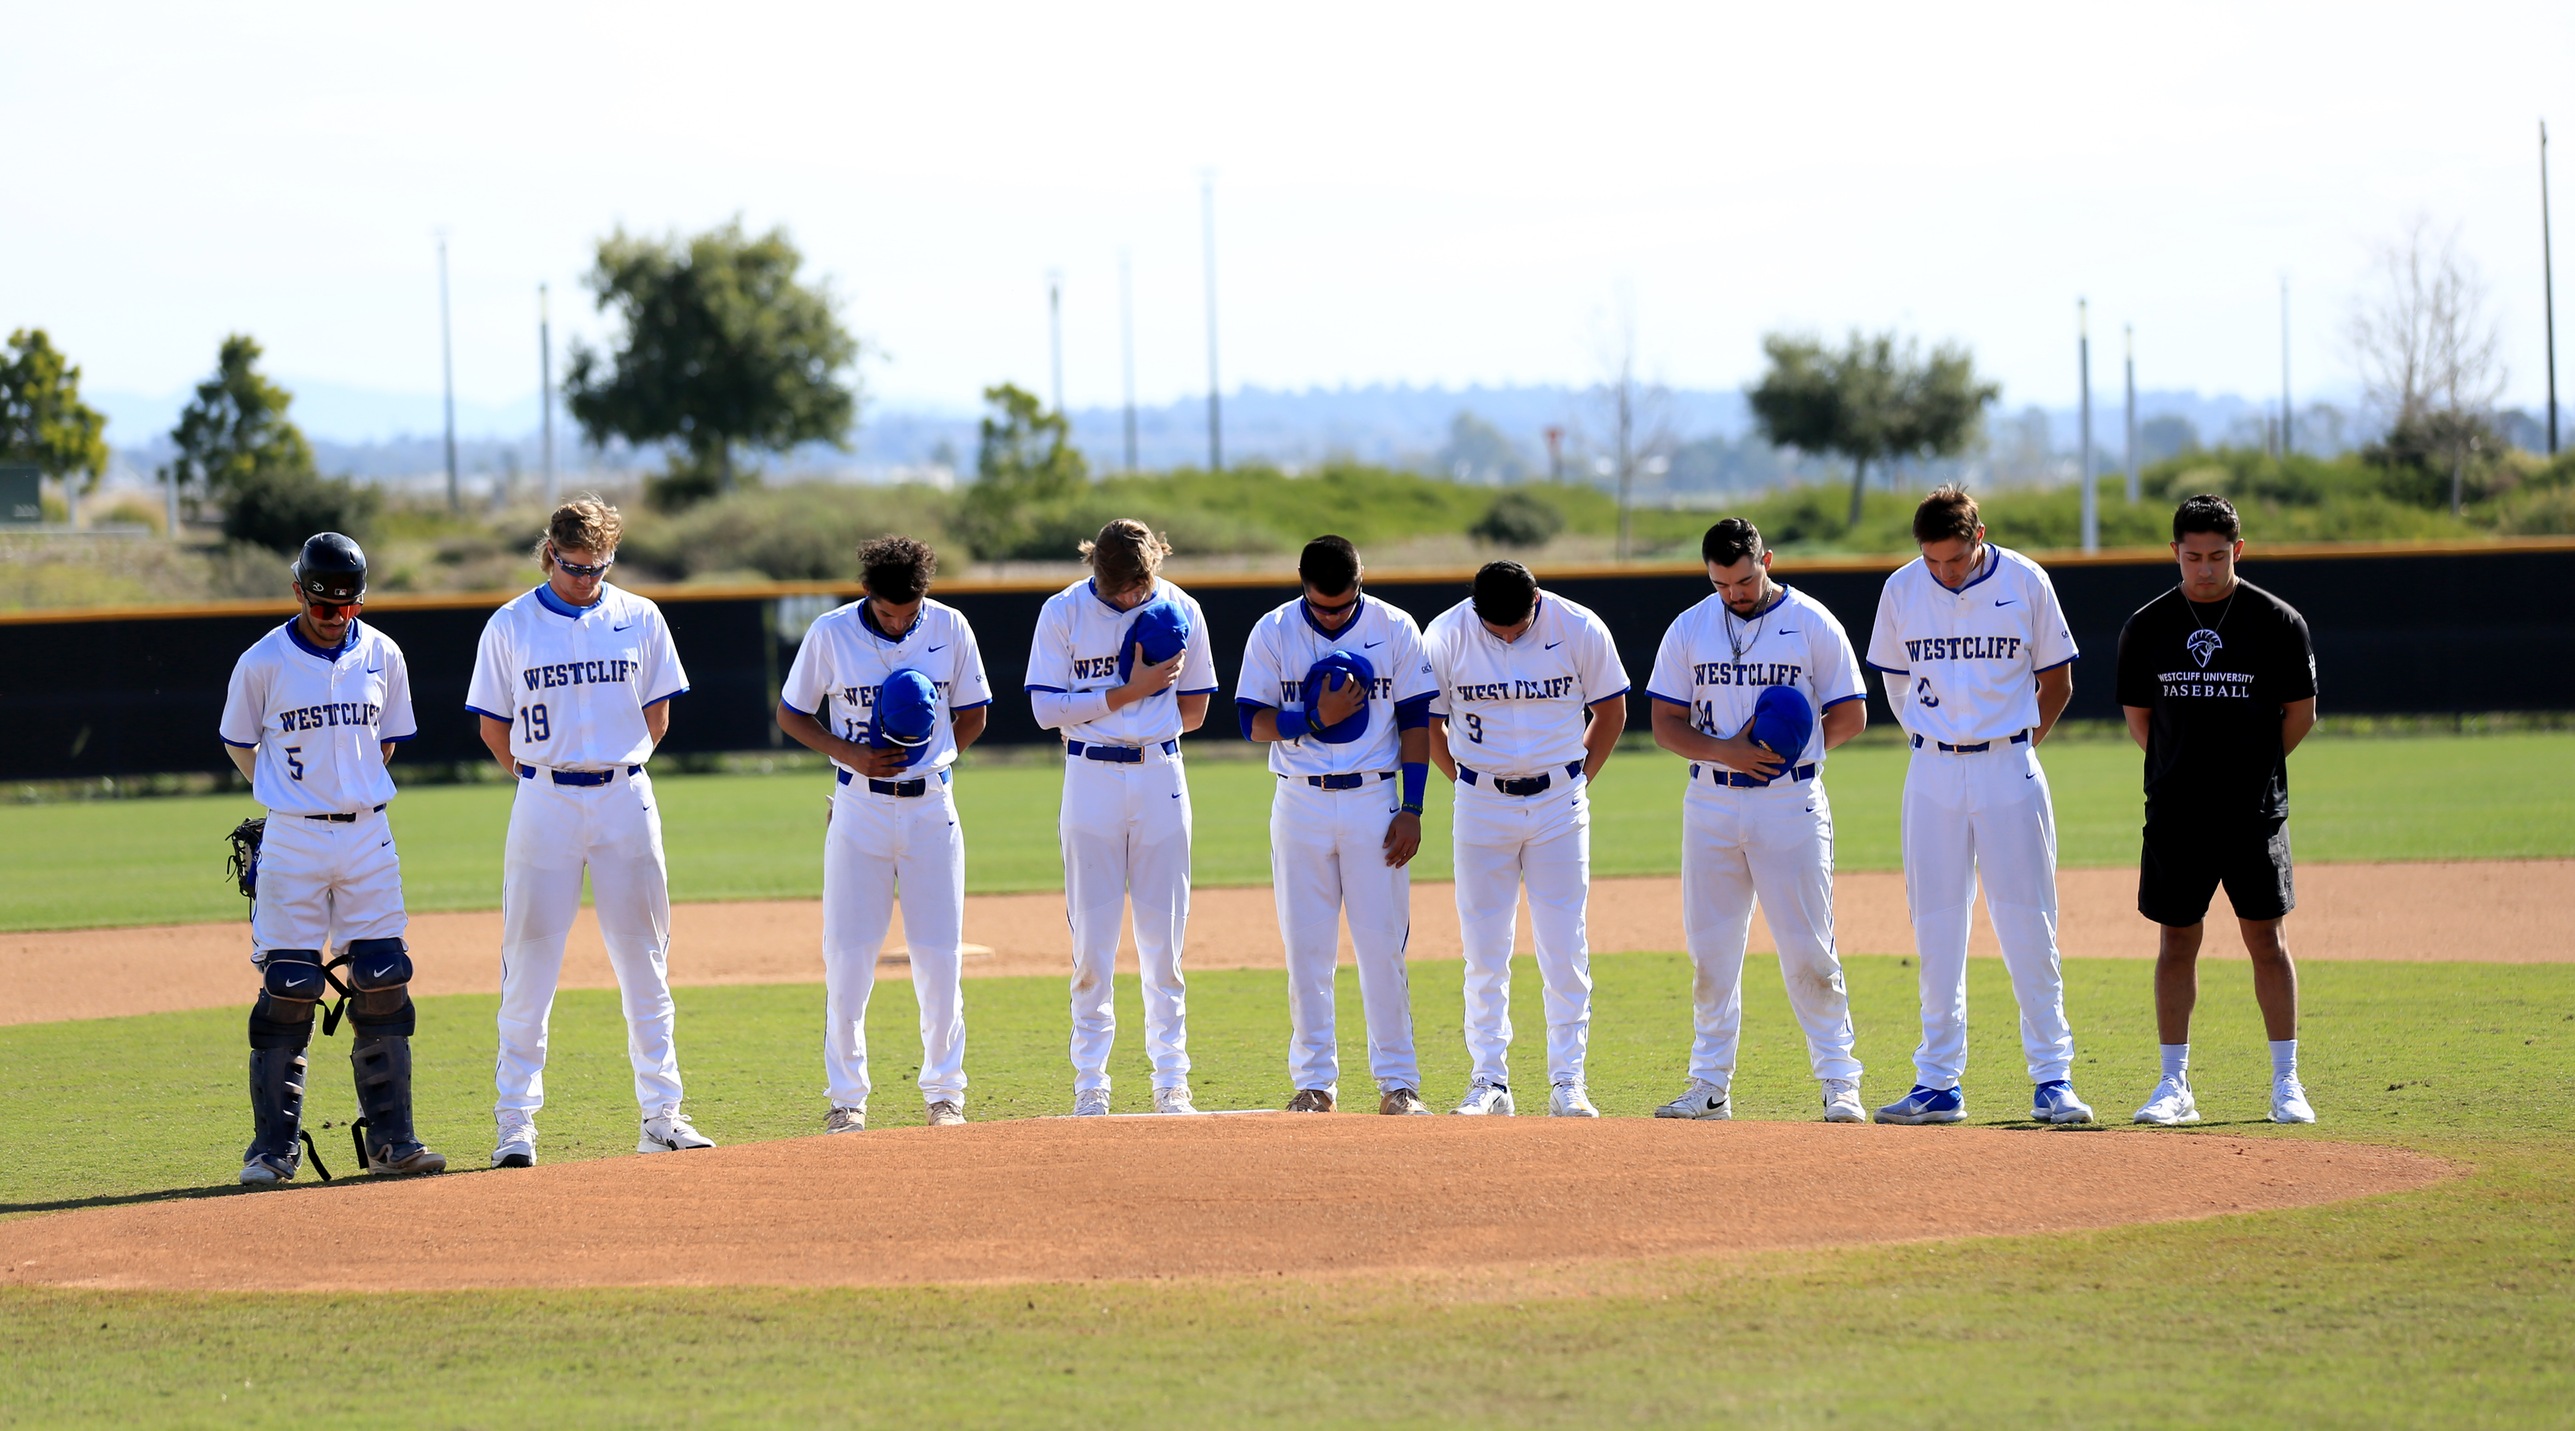 Westcliff upperclassmen who played with JJ Sanchez honored their fallen friend before Game 1 Wednesday.